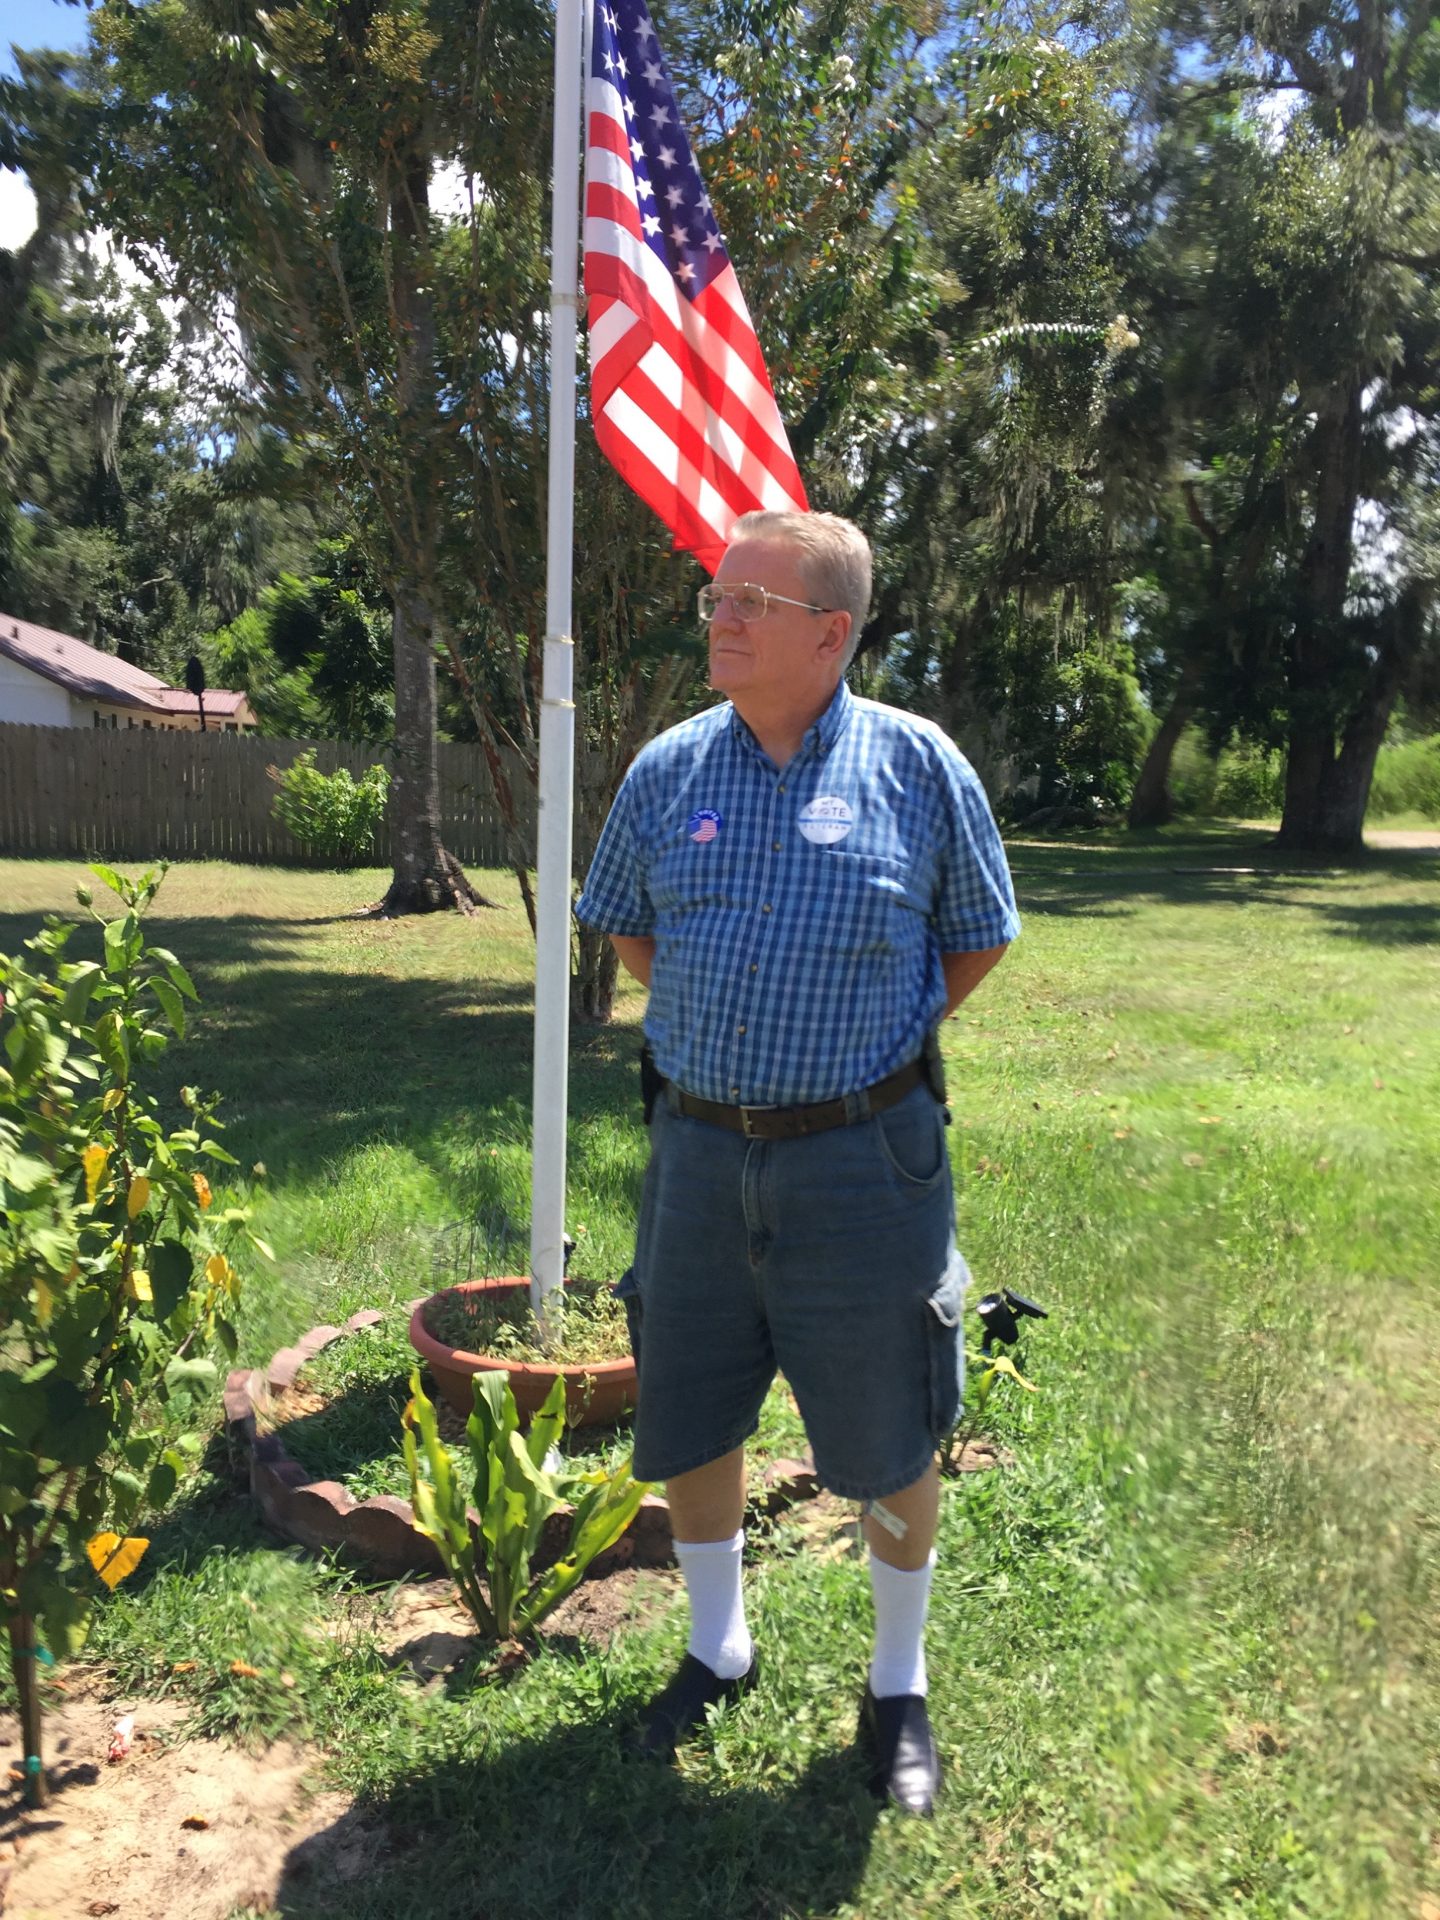 My soldier his flag Grandmas lily plants and aloe plants from old house in DeLand ❤️